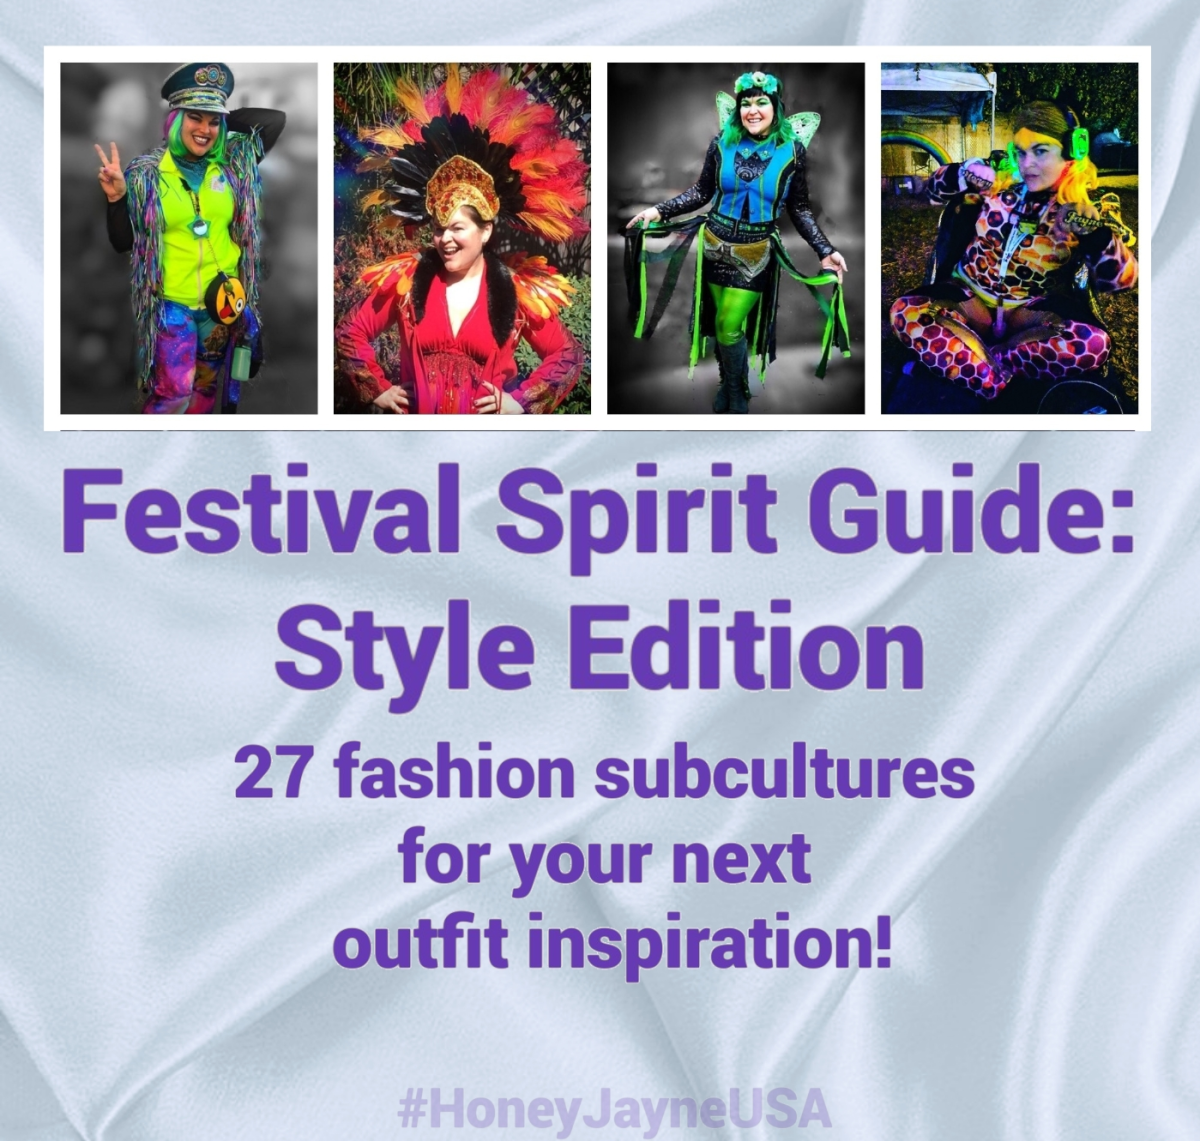 Fashion Guide to Festival Subcultures